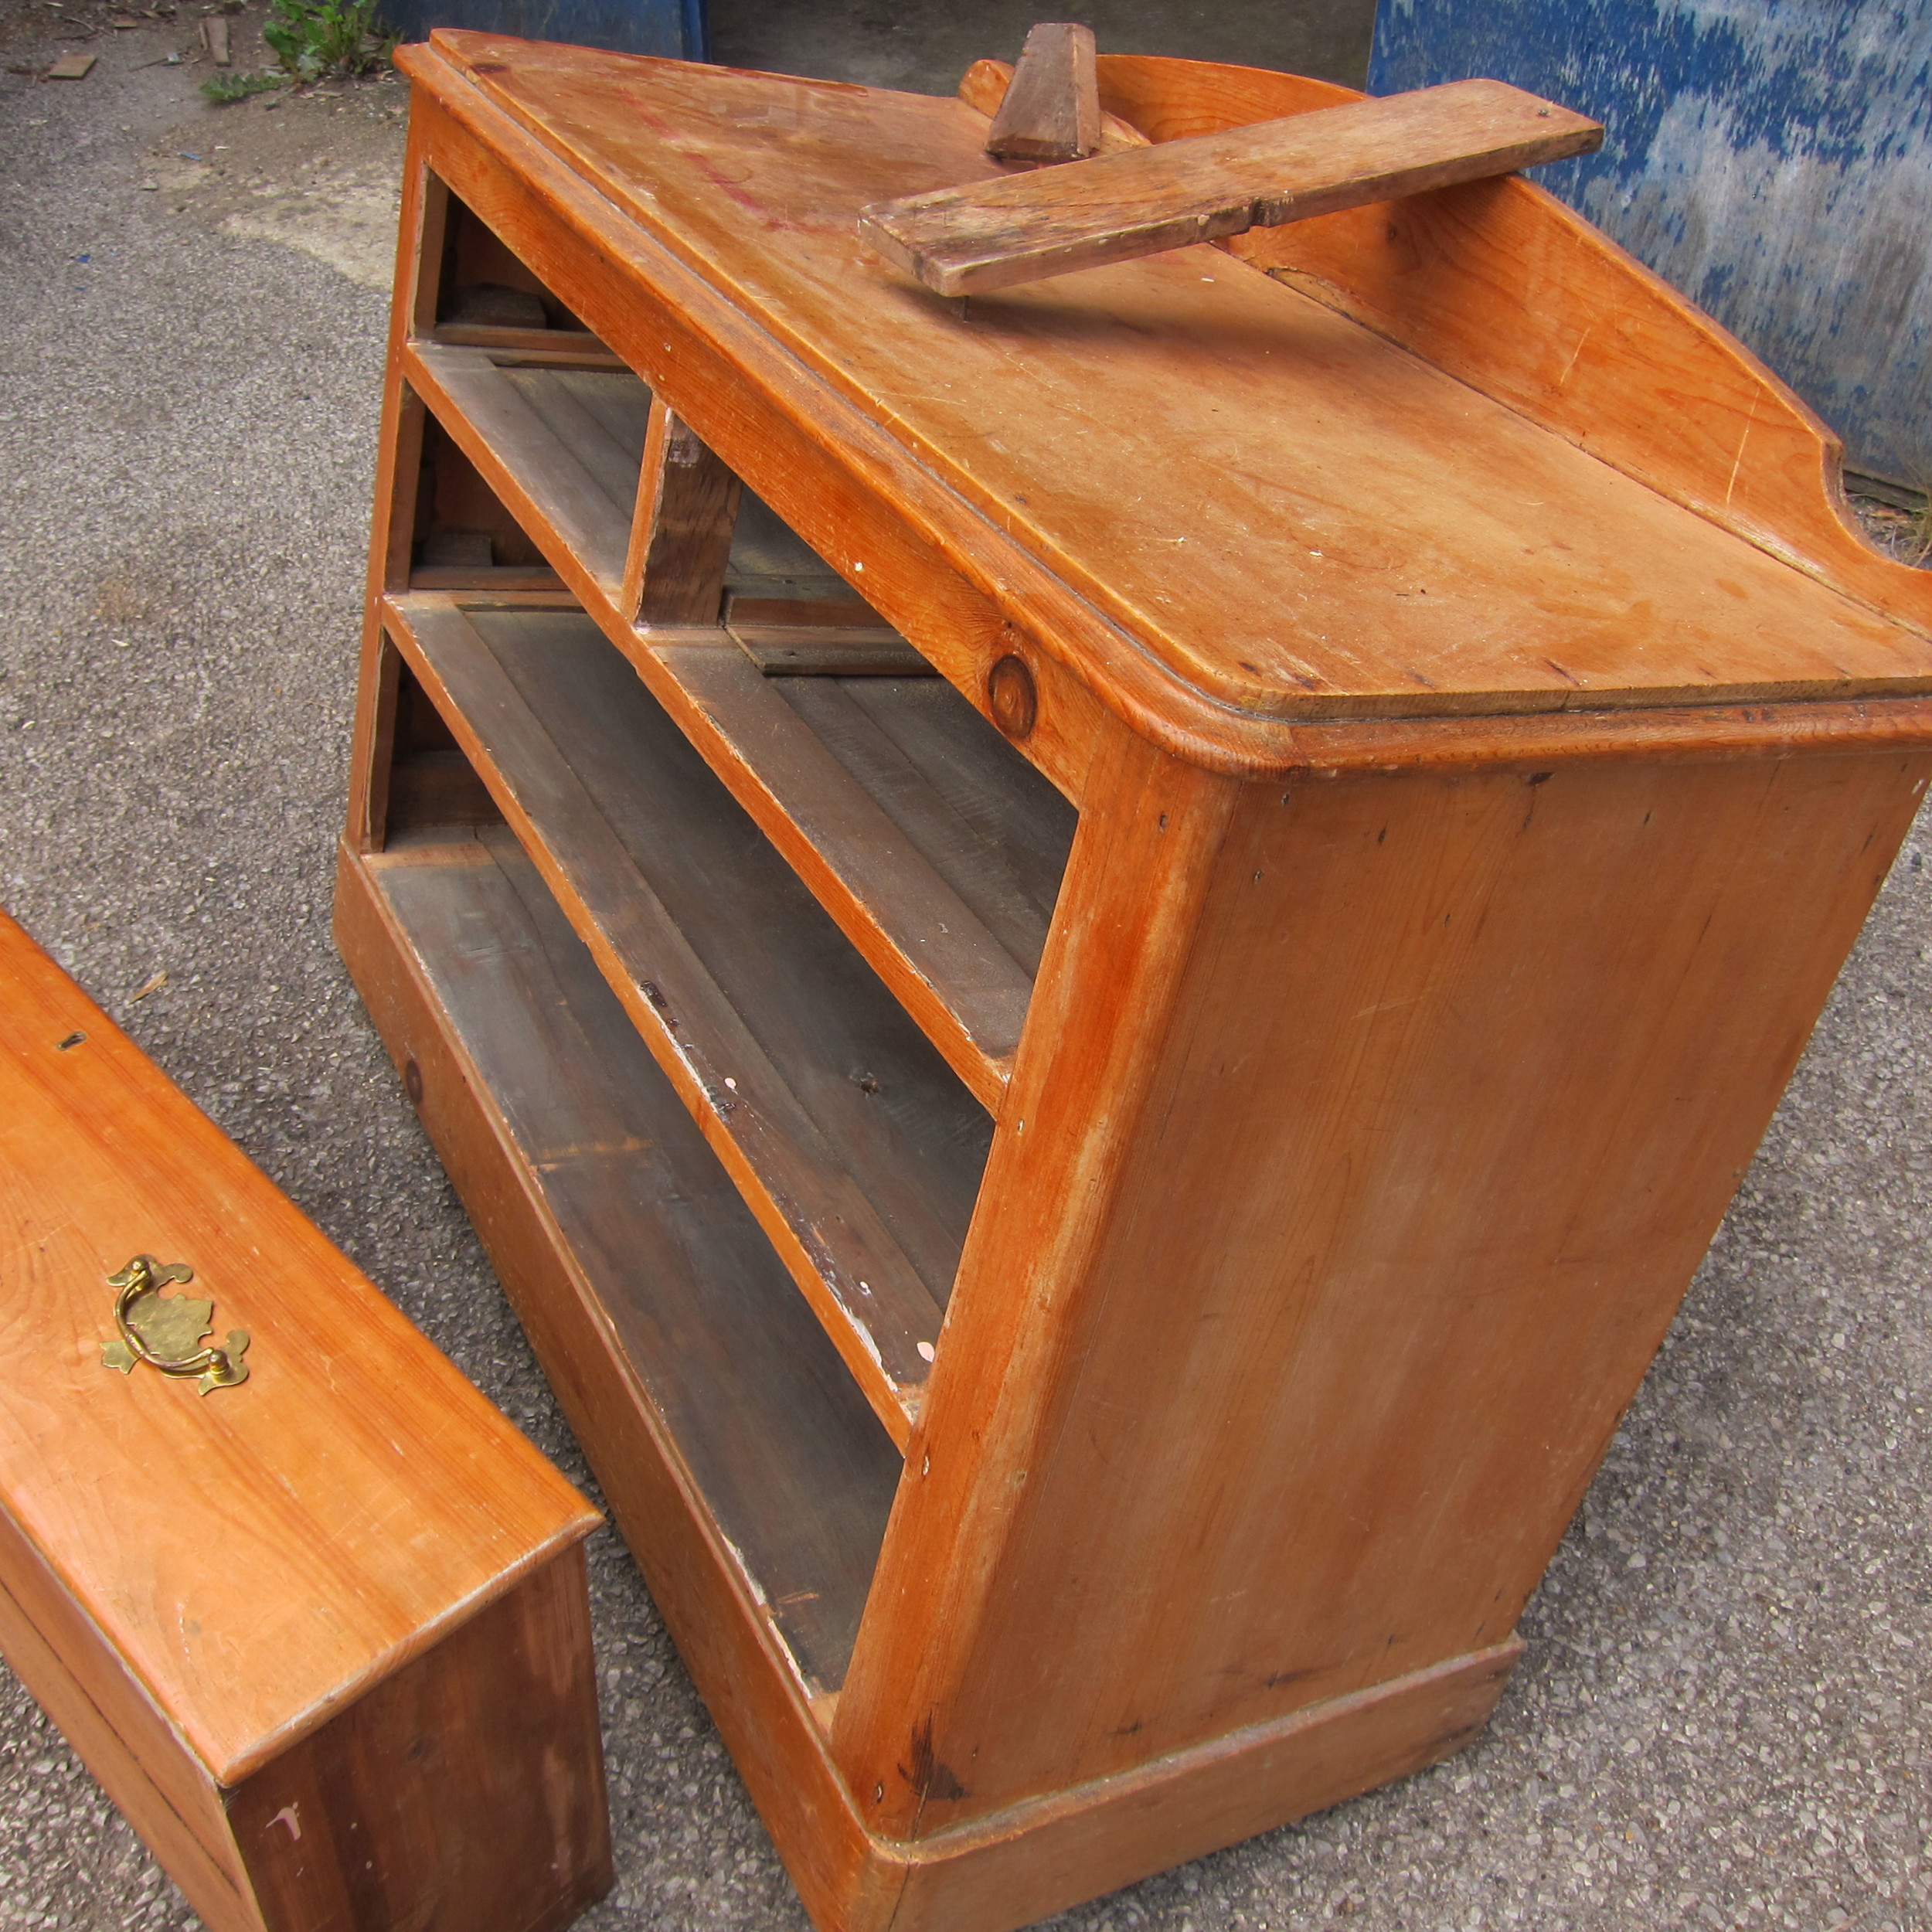 Antique pine chest of drawers in need of restoration